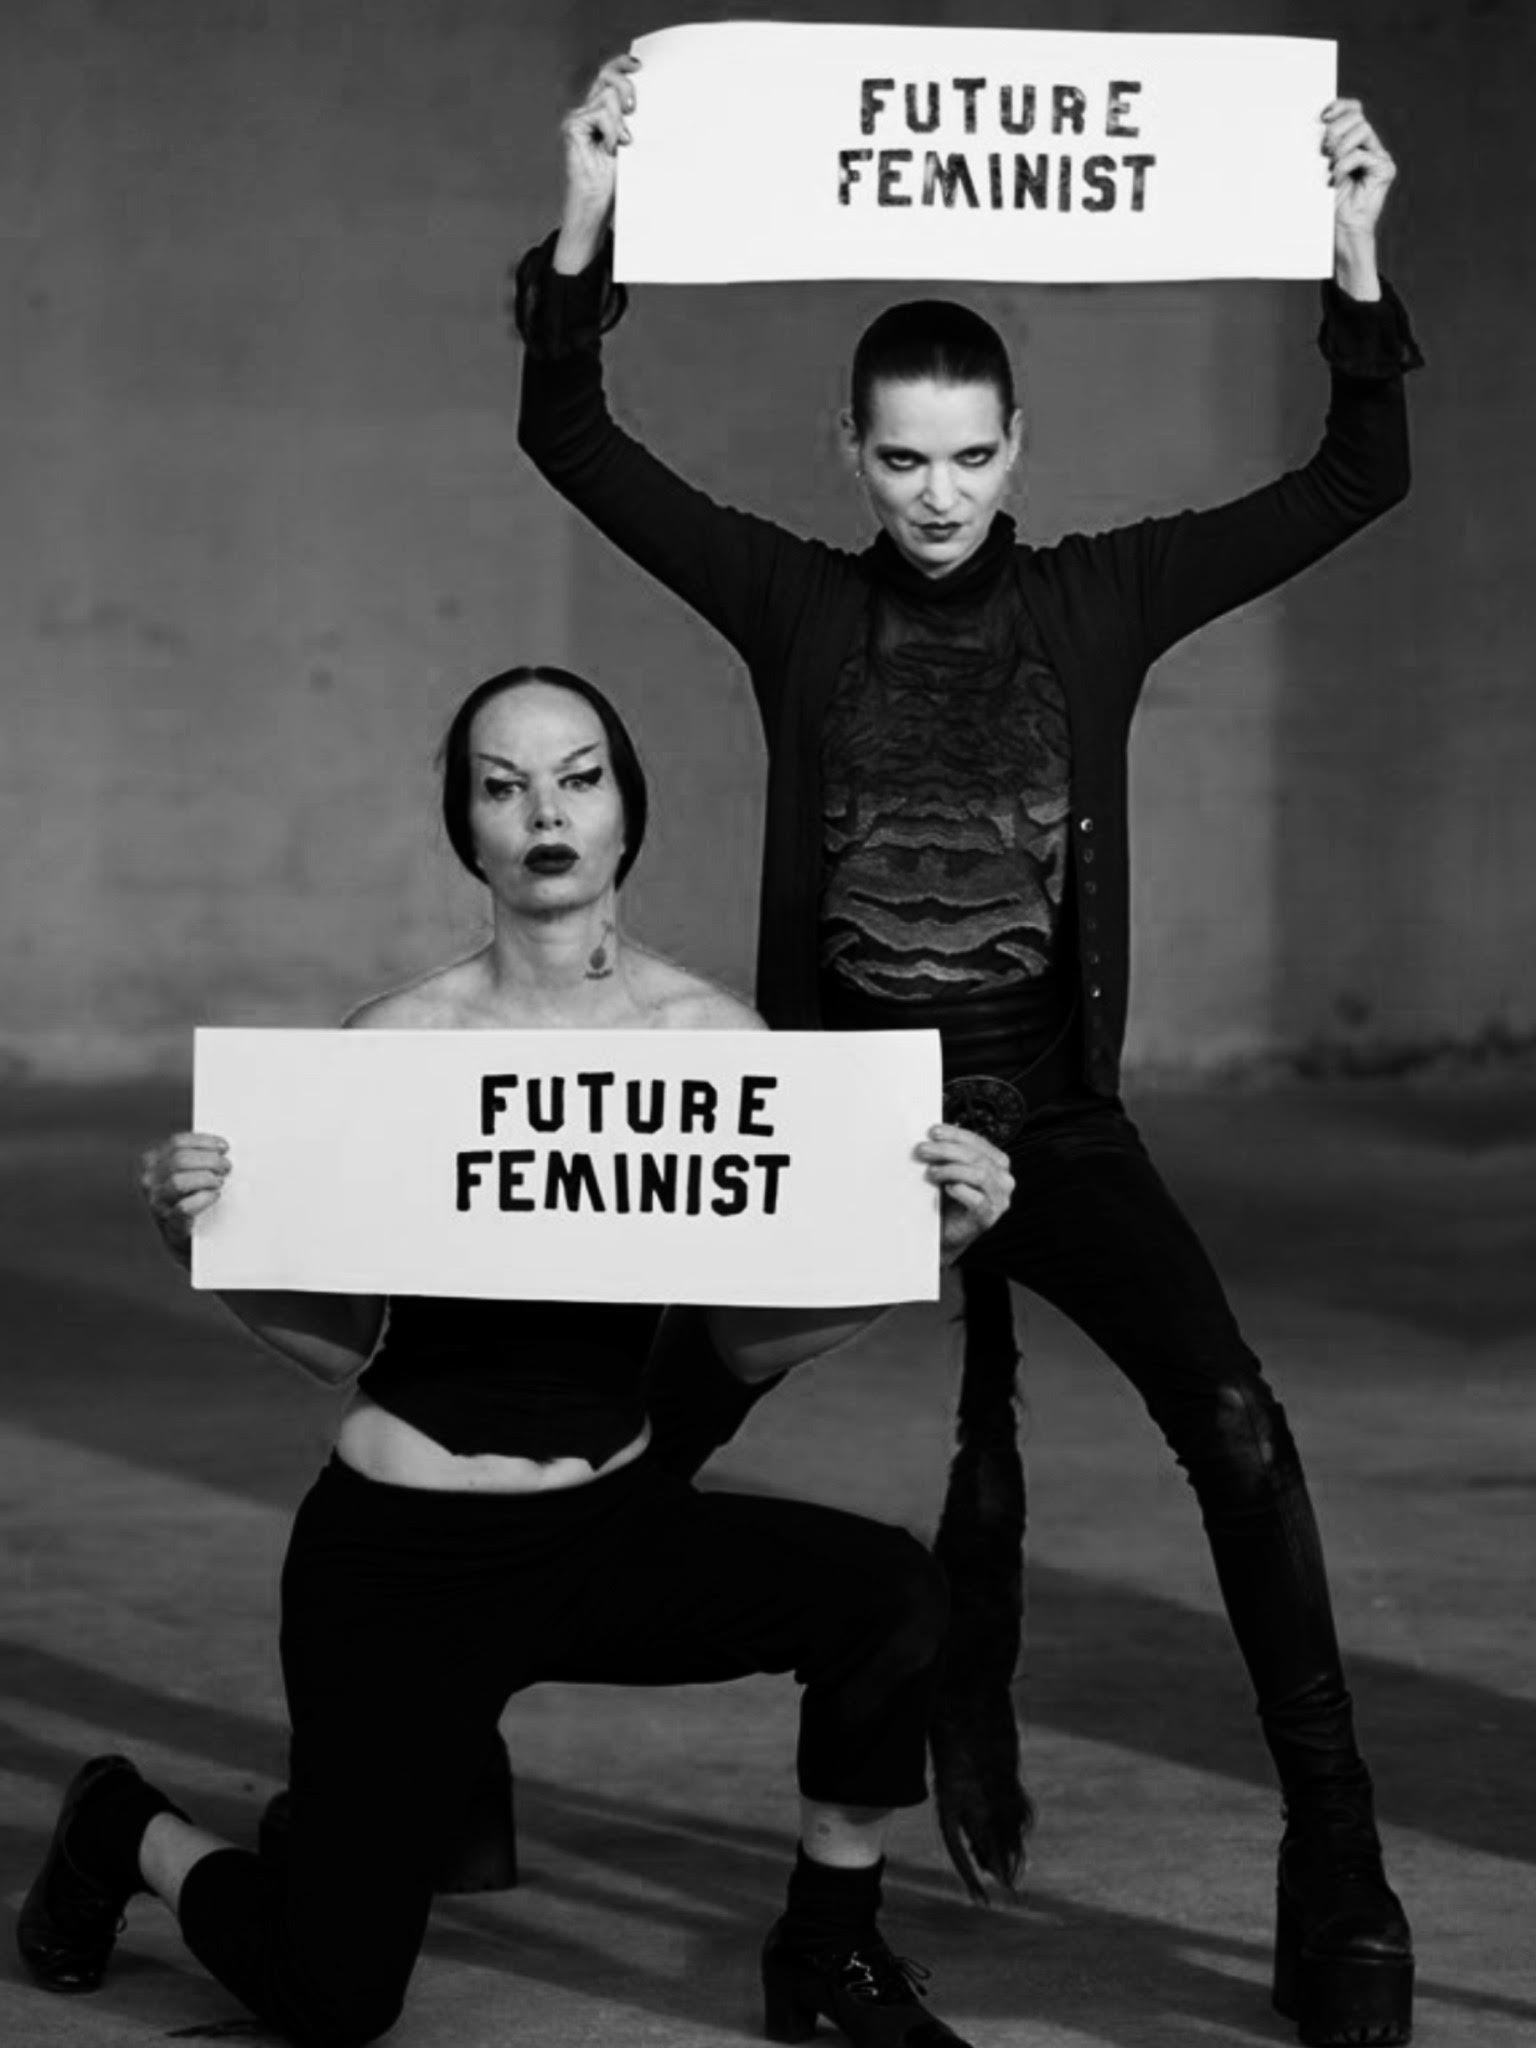 A Future Feminist Discussion with Kembra Pfahler and Johanna Constantine